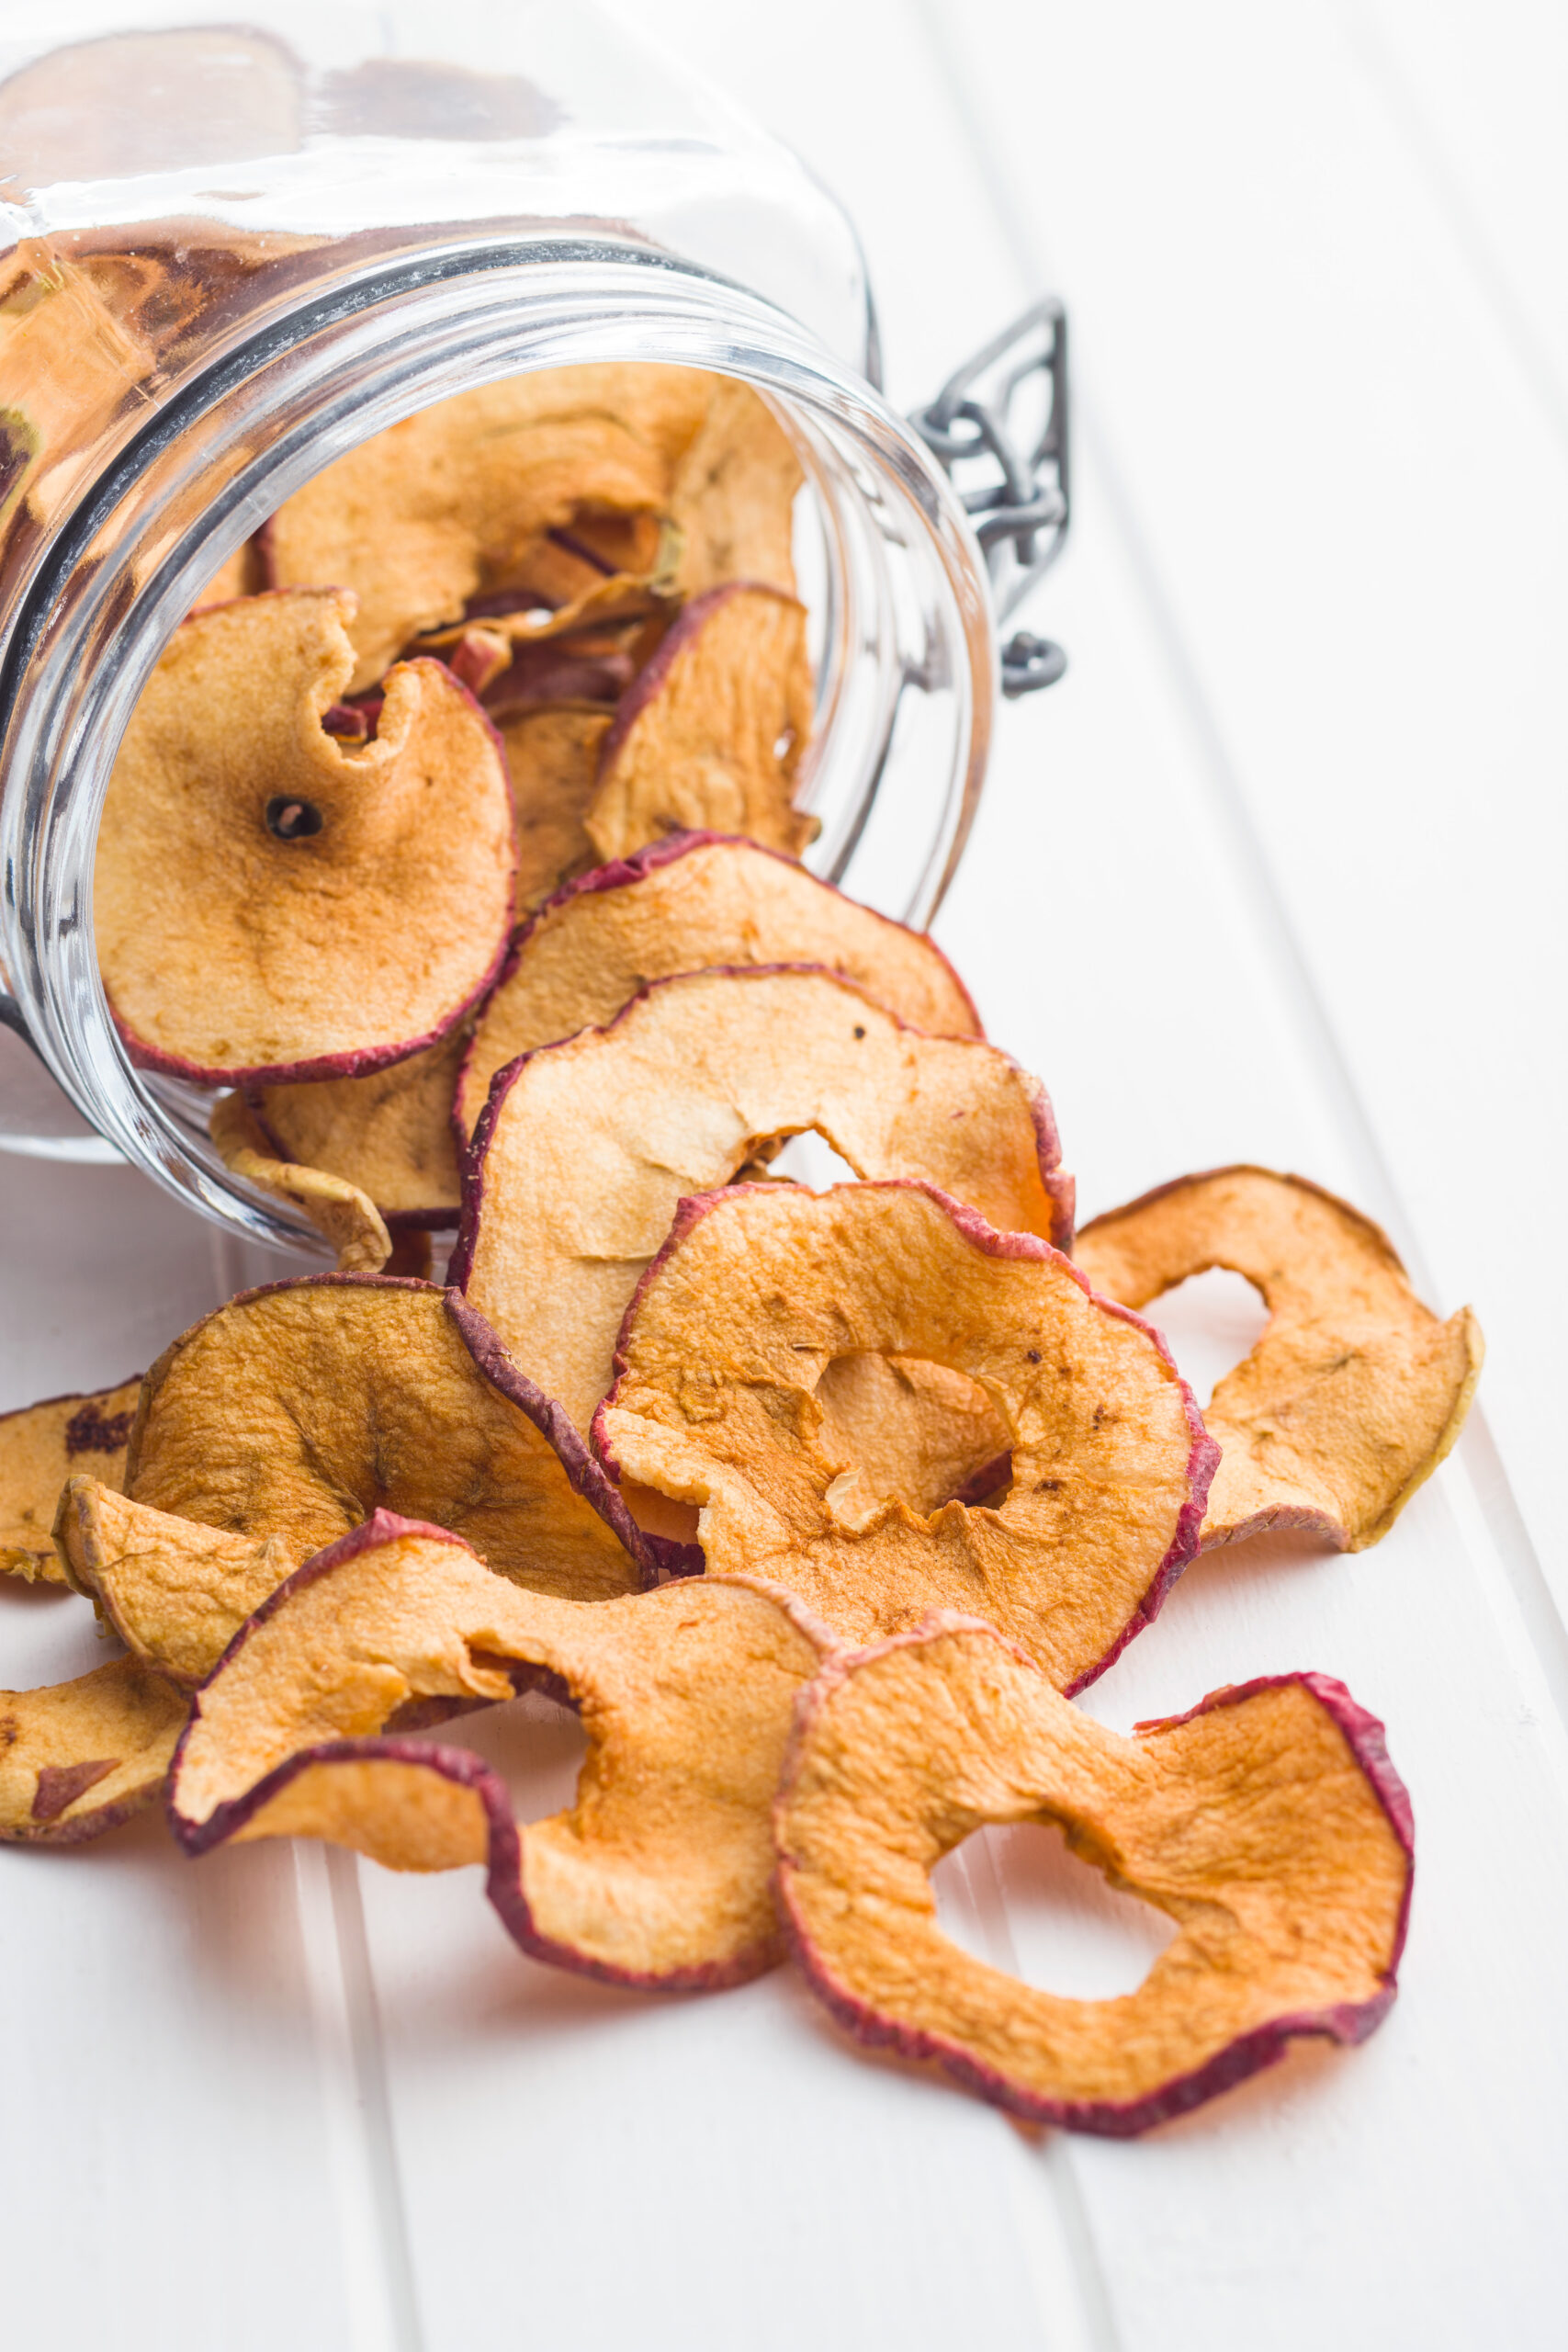 Magic Mill Dehydrator Review and Recipe for Cinnamon Apple Rings